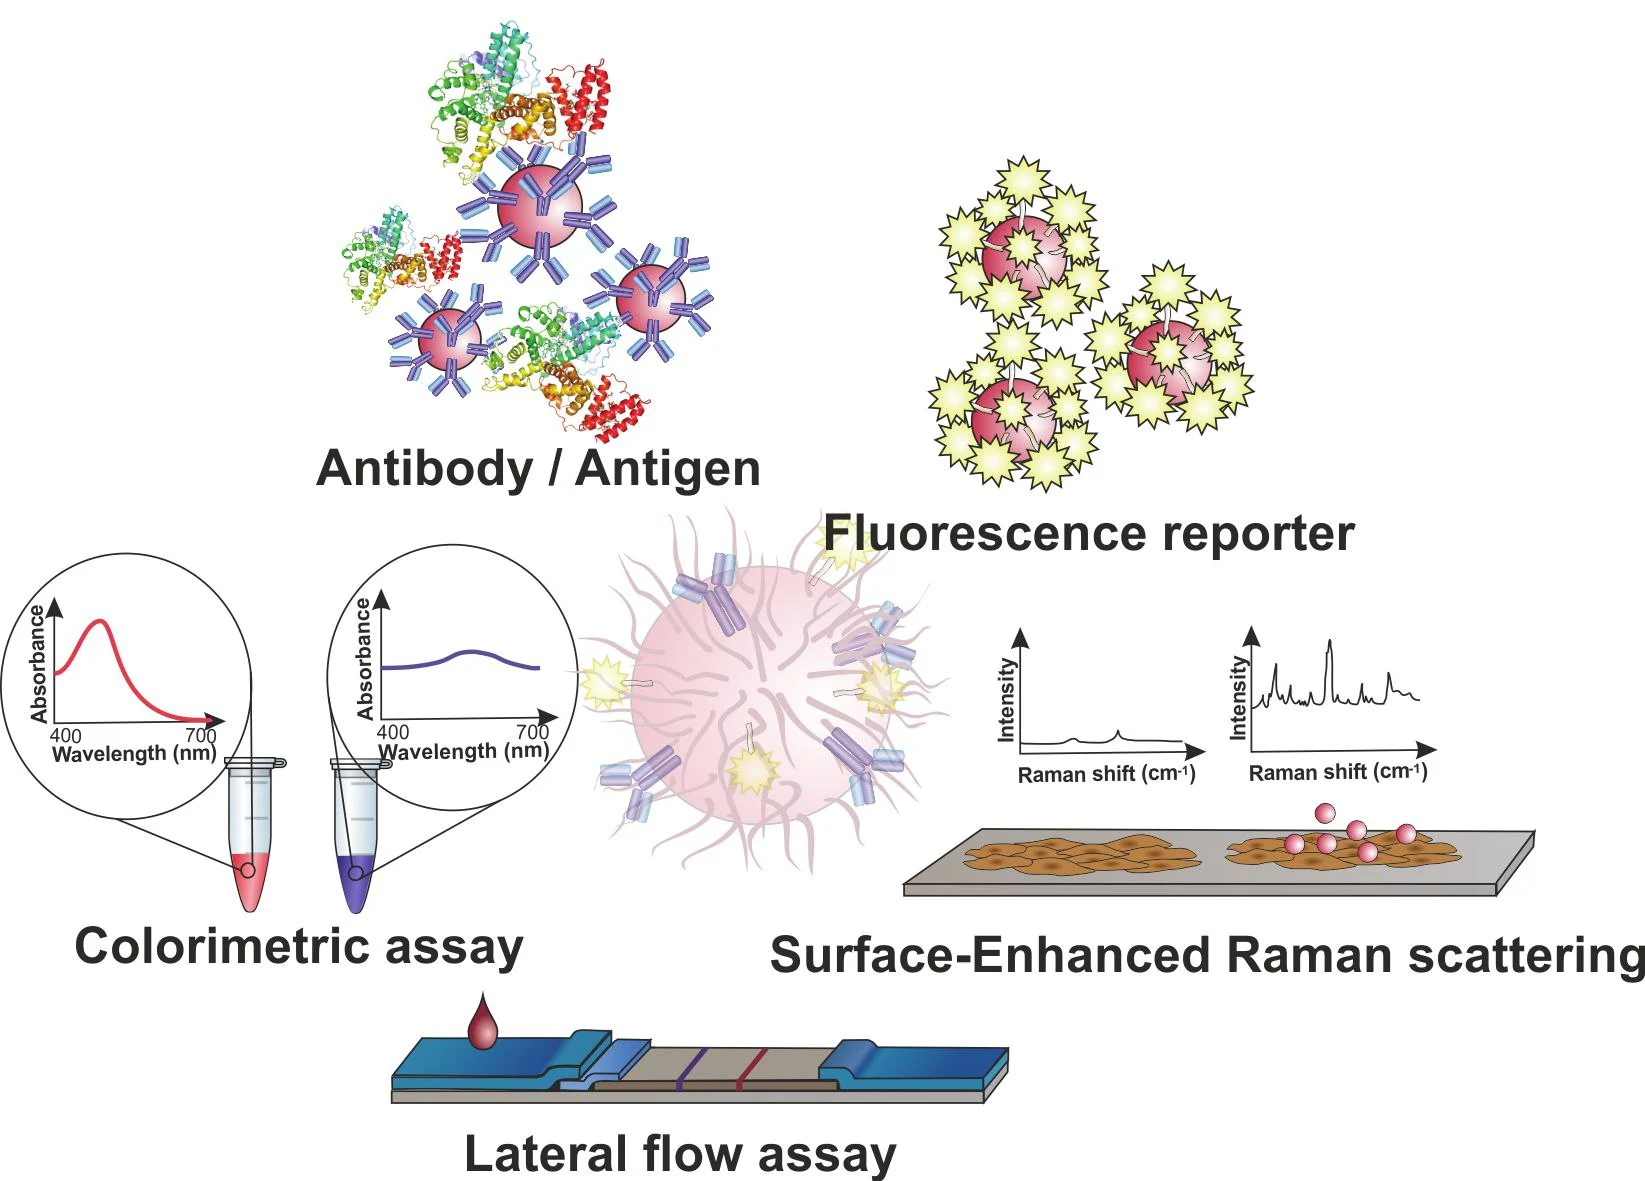 Gold nanoparticles (AuNPs) for molecular diagnostics. AuNPs may be used in a plethora of diagnostics schemes based on antibody-antigen recognition or DNA hybridization, such as colorimetric assays based on inter-particle distance; fluorescence modulation as a function of the distance between the fluorophore and the AuNP surface; Surface Enhanced Raman Spectroscopy (SERS); and the application of AuNPs as tags in lateral flow platforms (LFAs) for point-of-need.